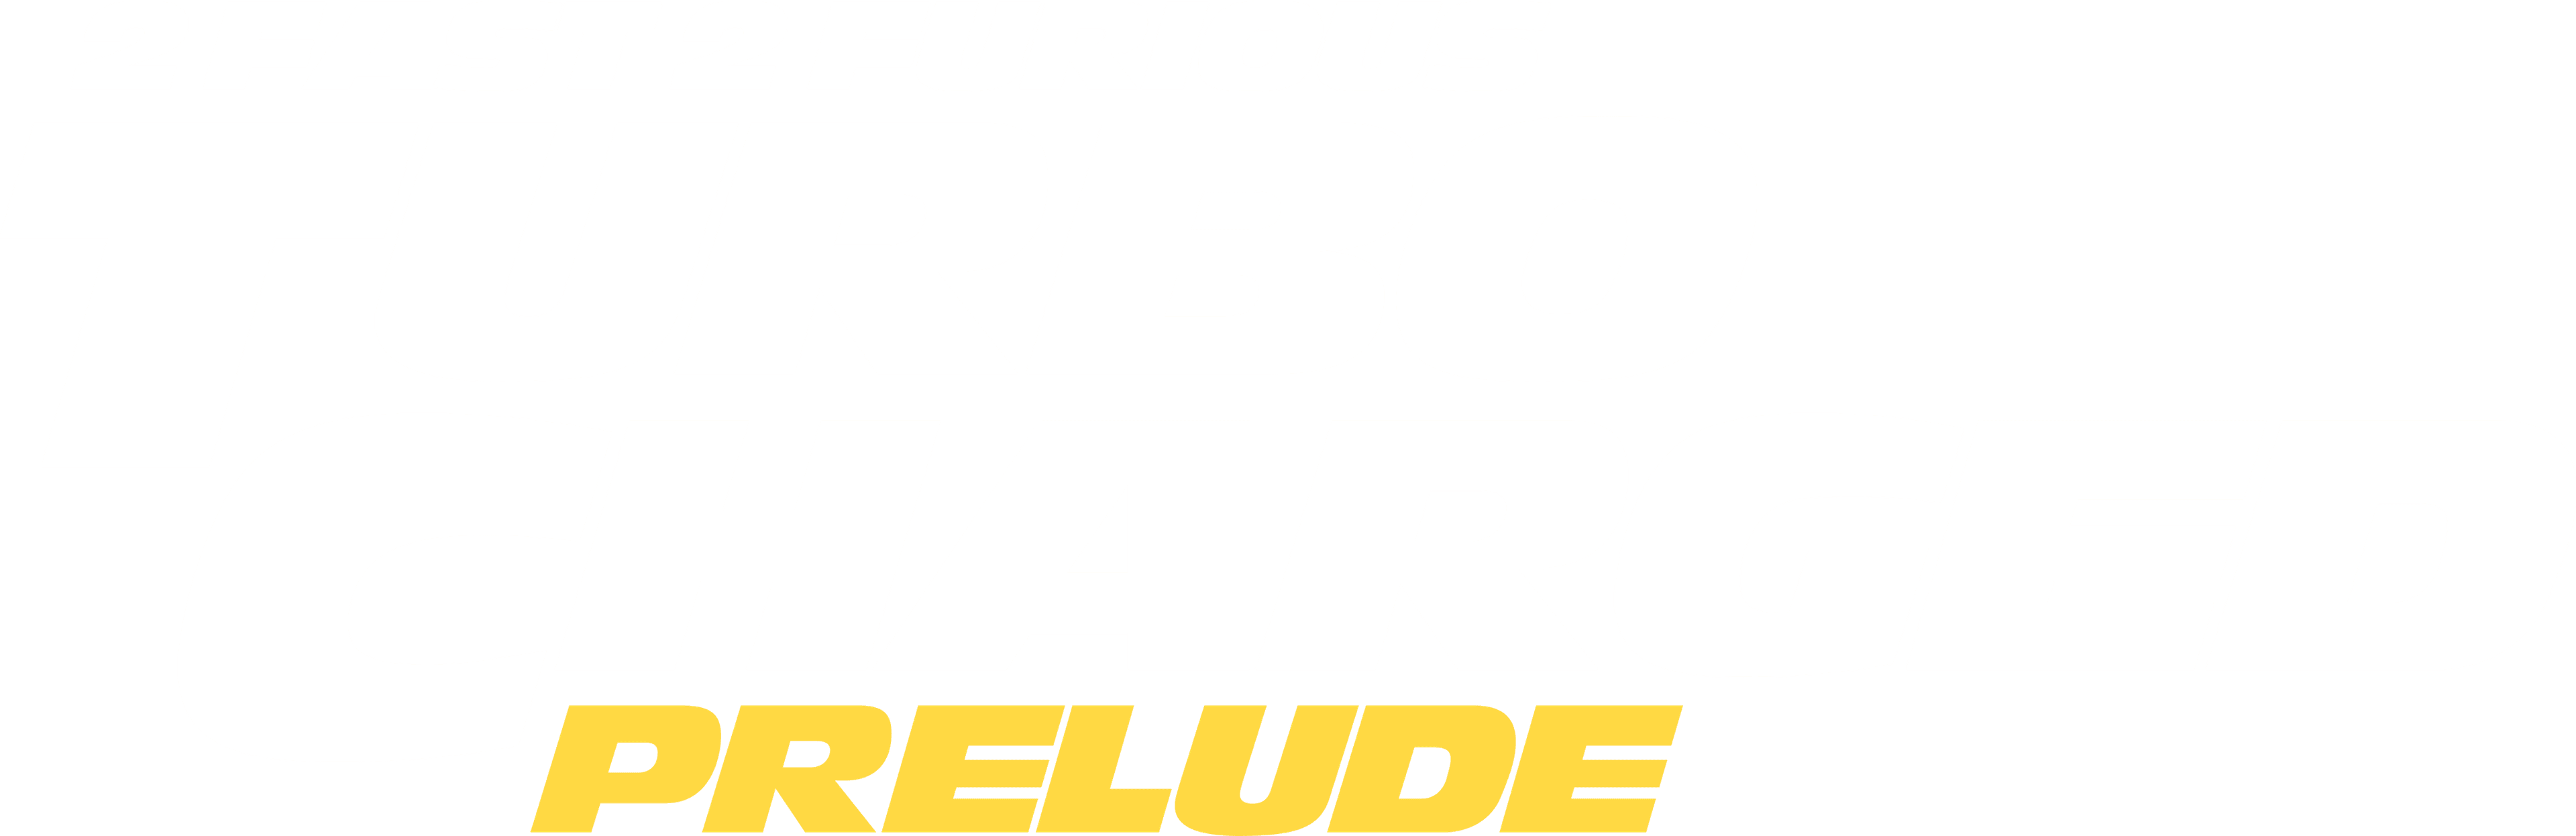 The Turbo Charged Prelude for 2 Fast 2 Furious logo